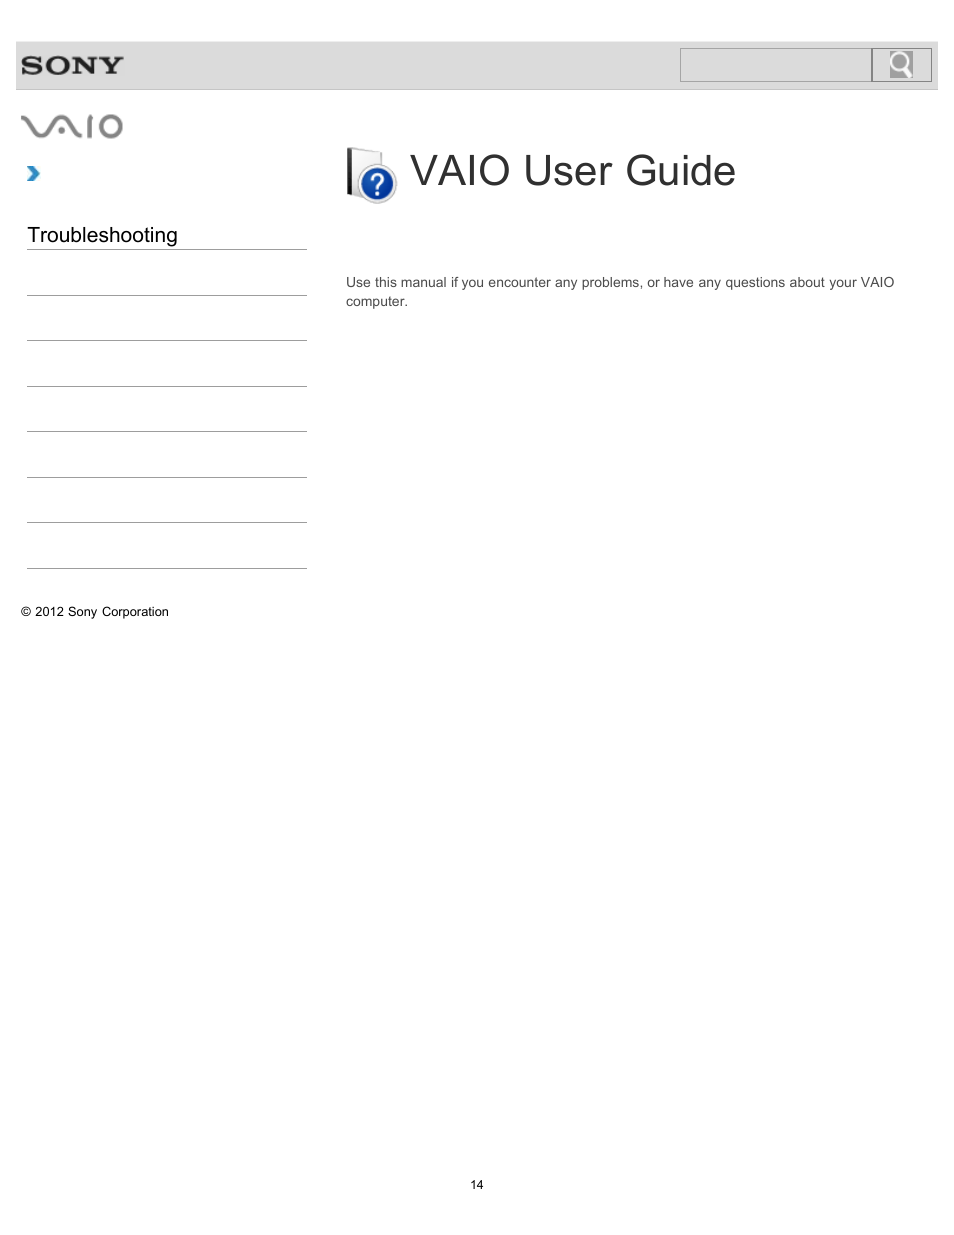 Troubleshooting, Vaio user guide, Svl2411 series | Sony SVL241190X User Manual | Page 14 / 522